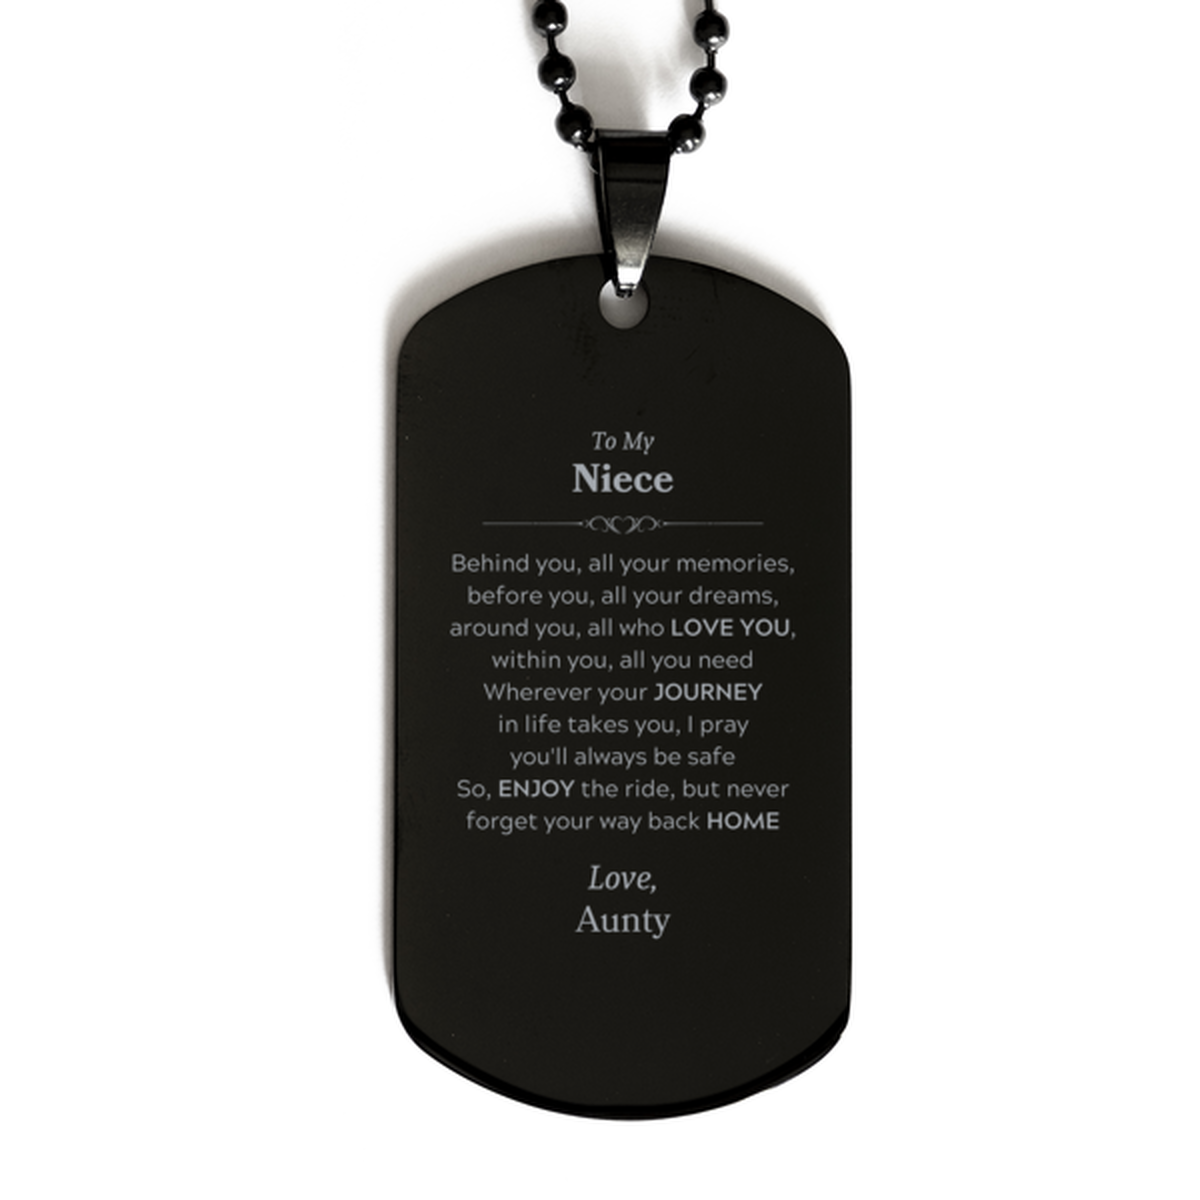 To My Niece Graduation Gifts from Aunty, Niece Black Dog Tag Christmas Birthday Gifts for Niece Behind you, all your memories, before you, all your dreams. Love, Aunty